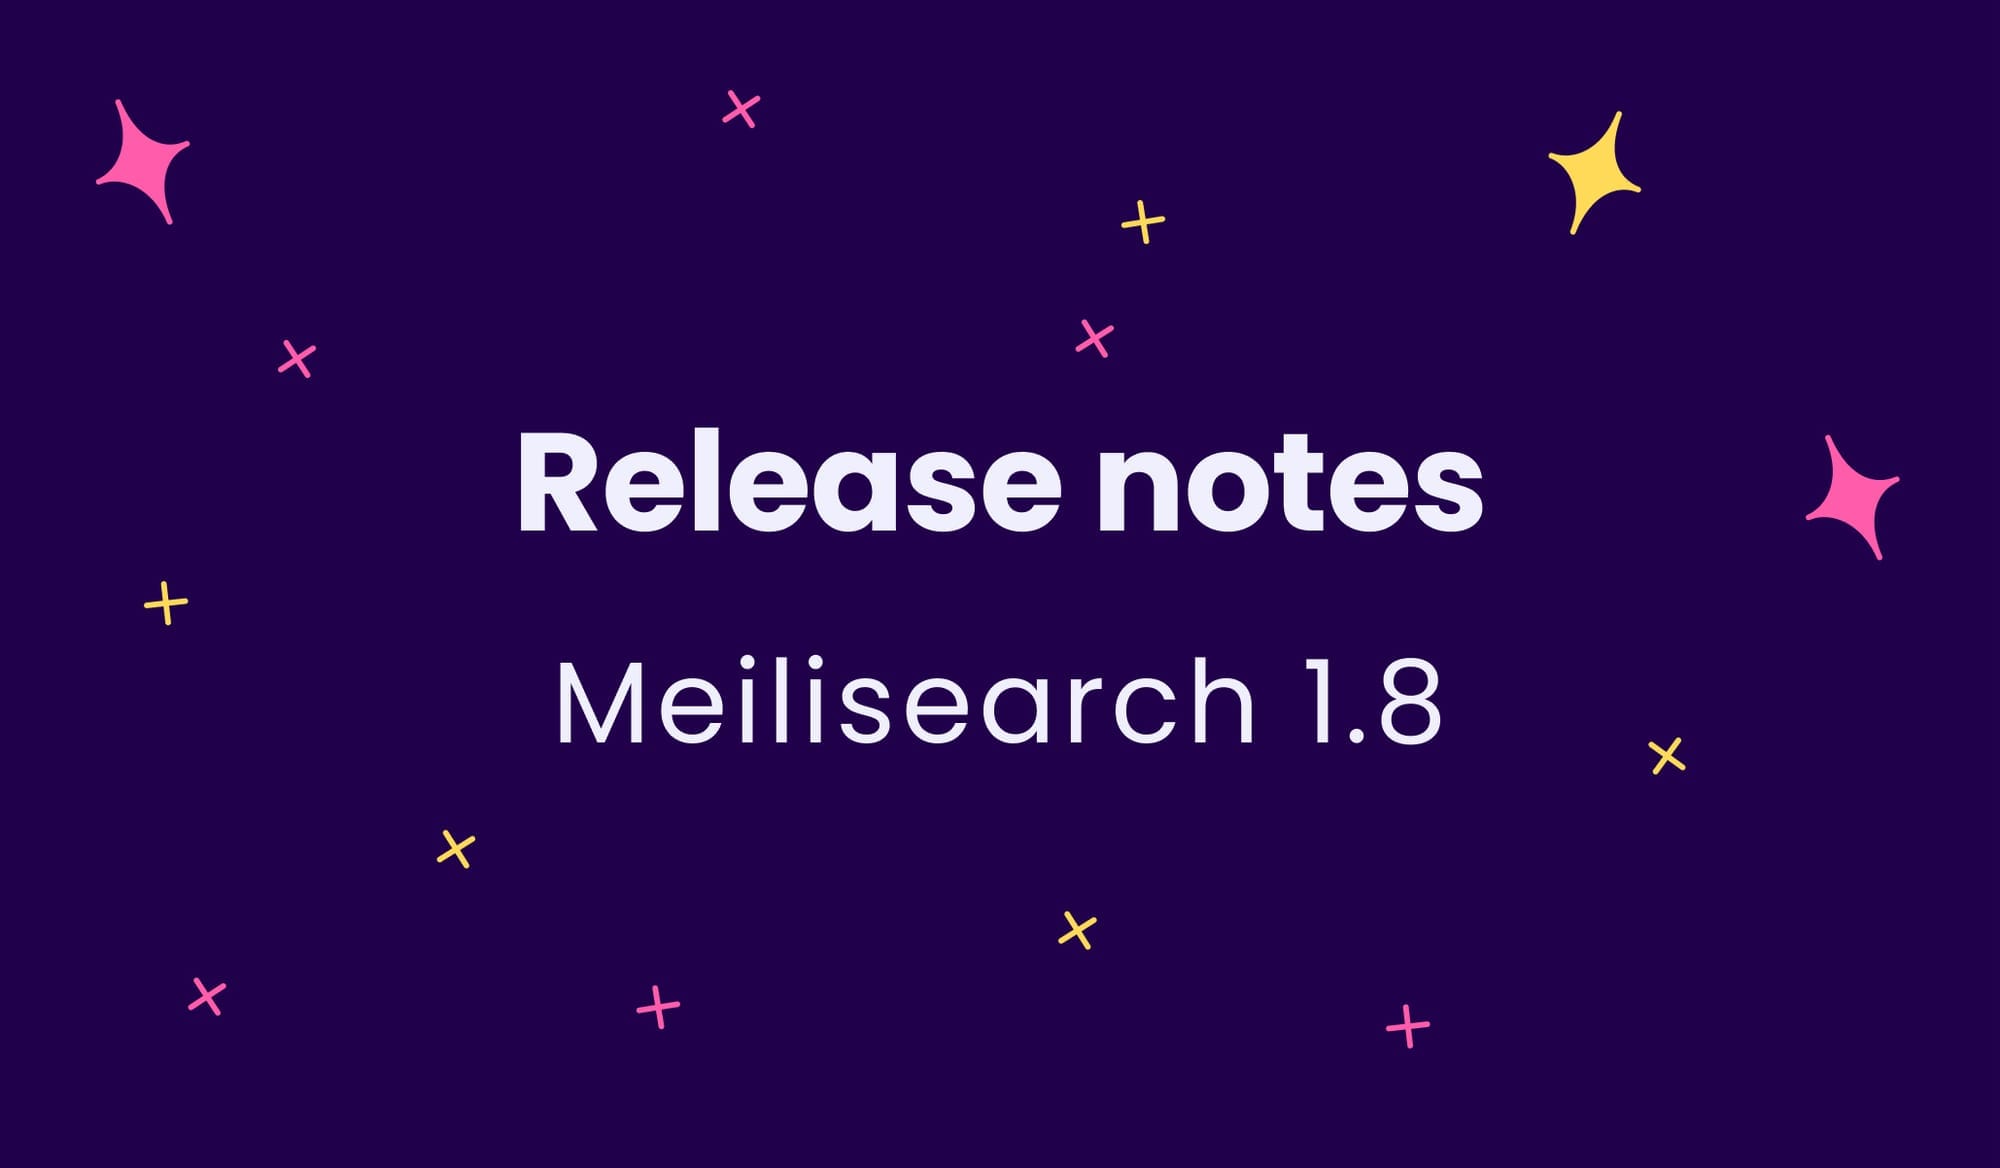 Meilisearch 1.8 release notes